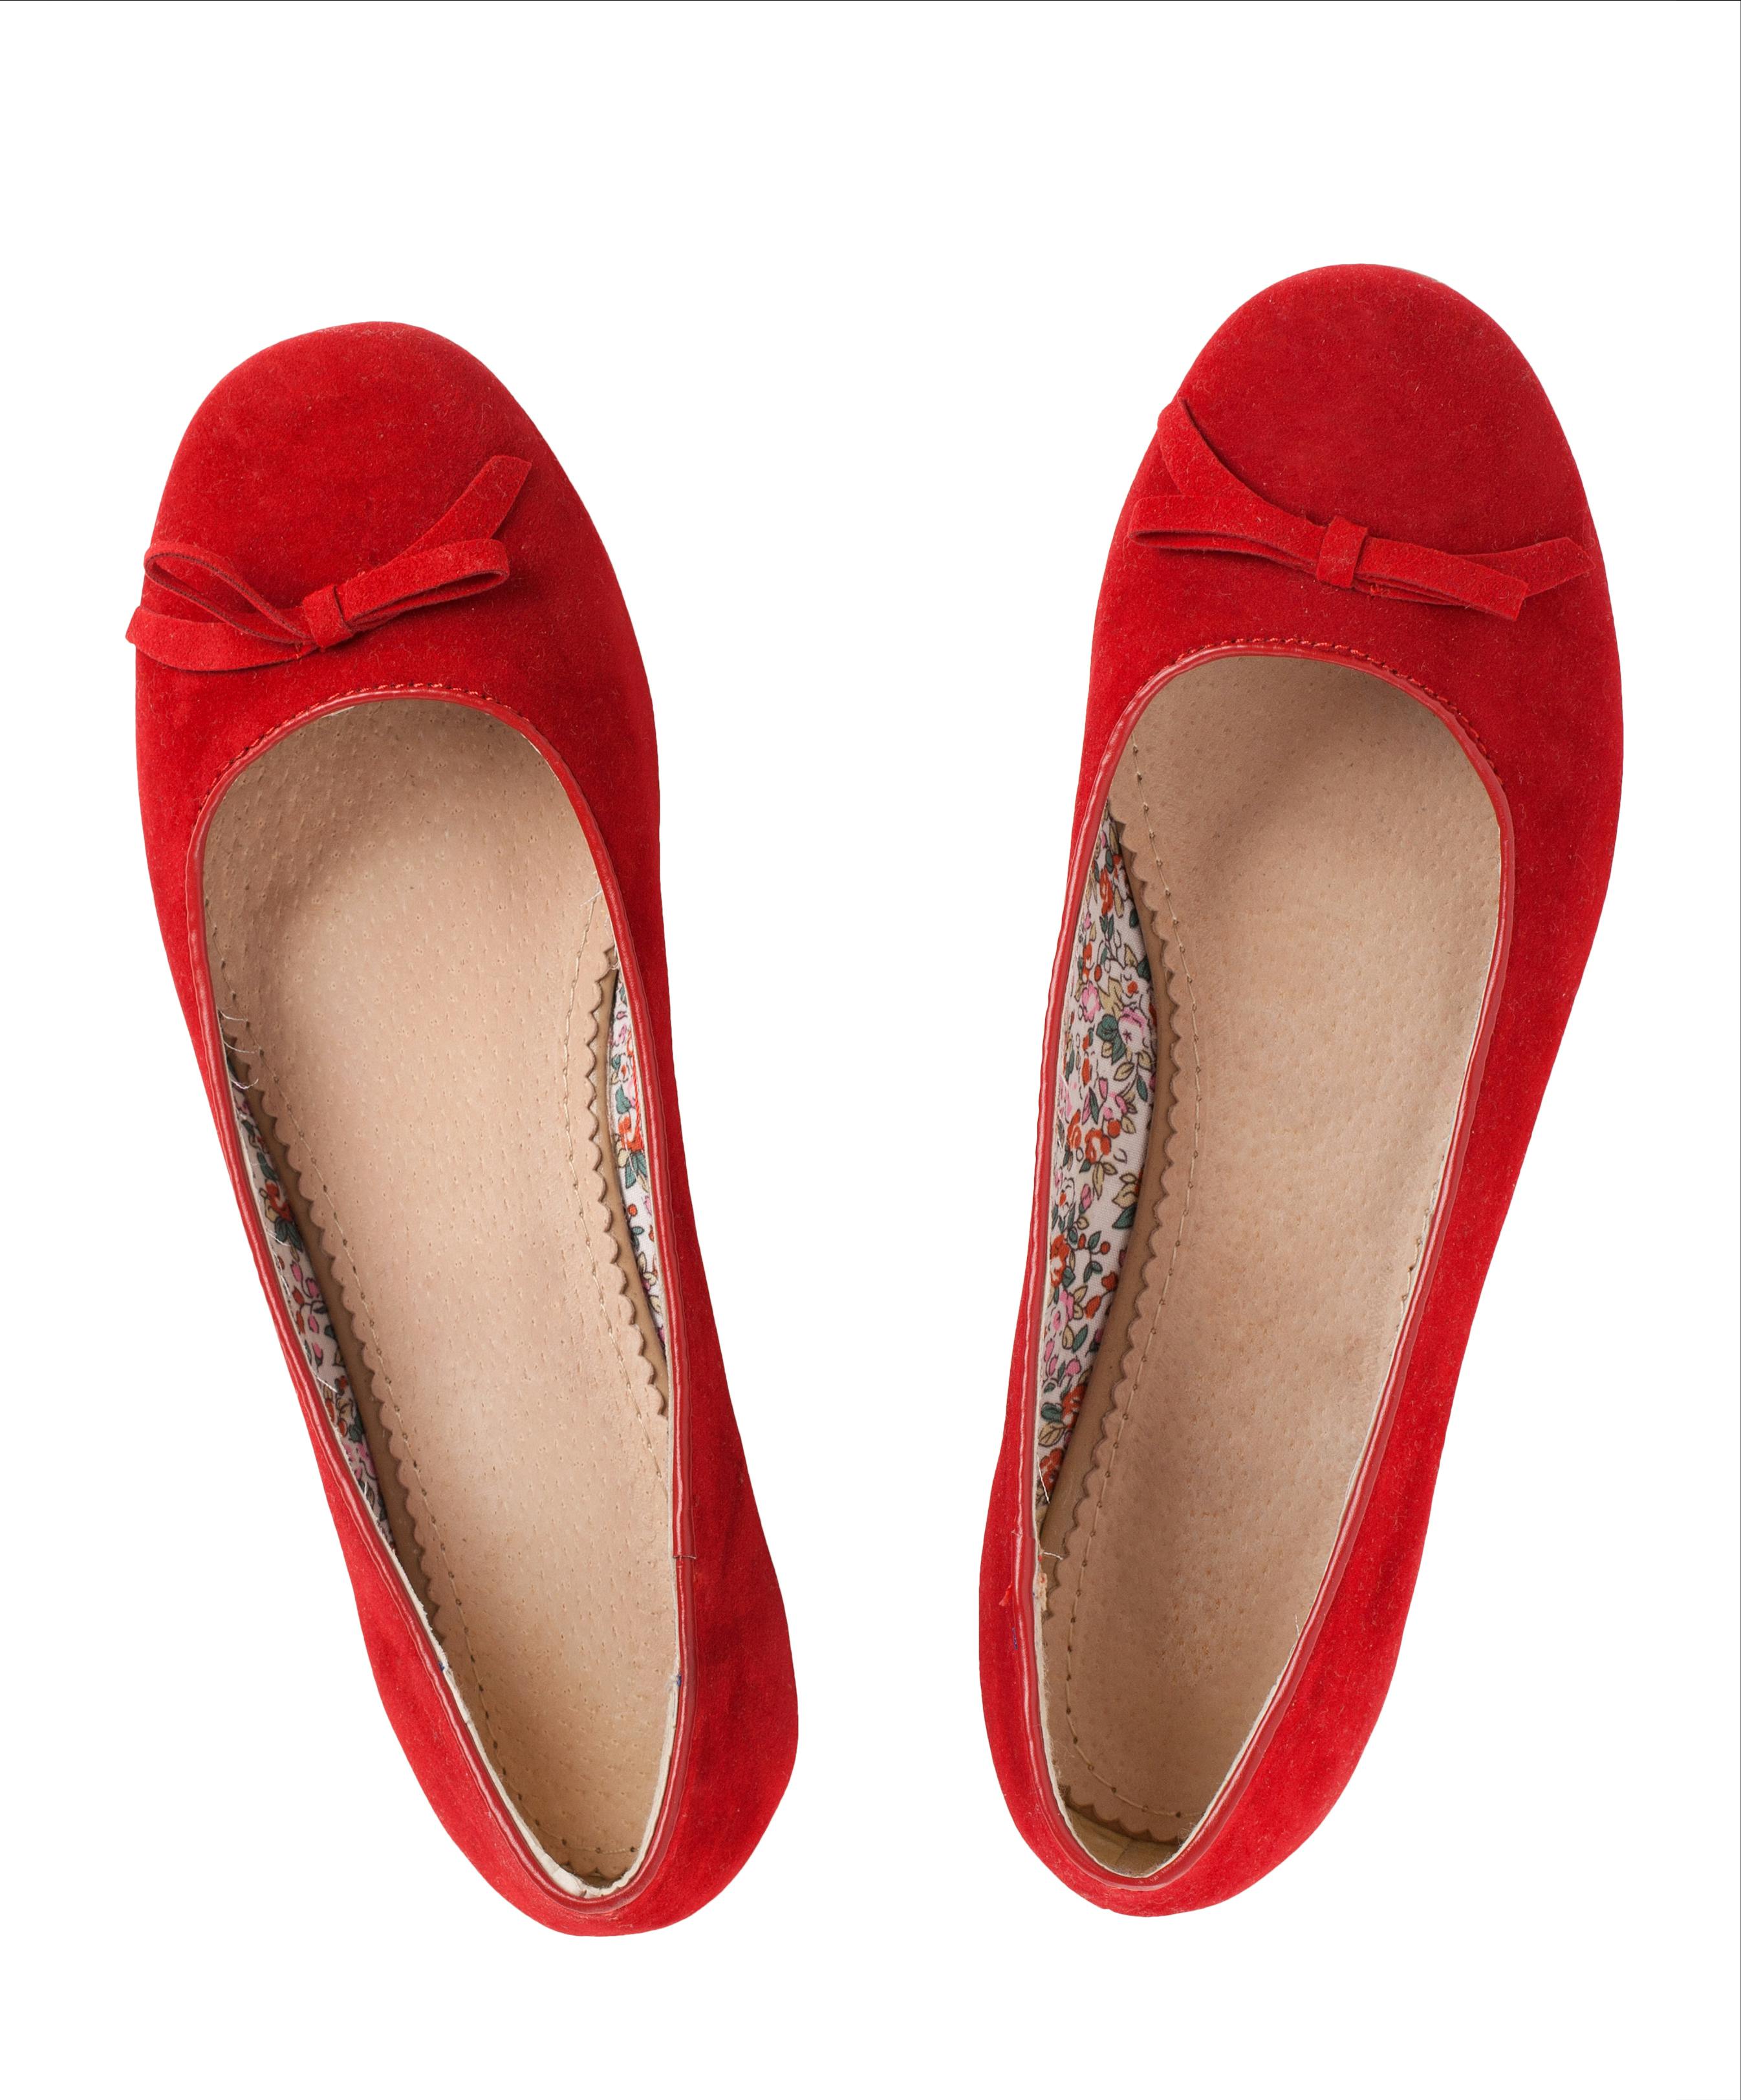 A pair of red flat shoes over white background